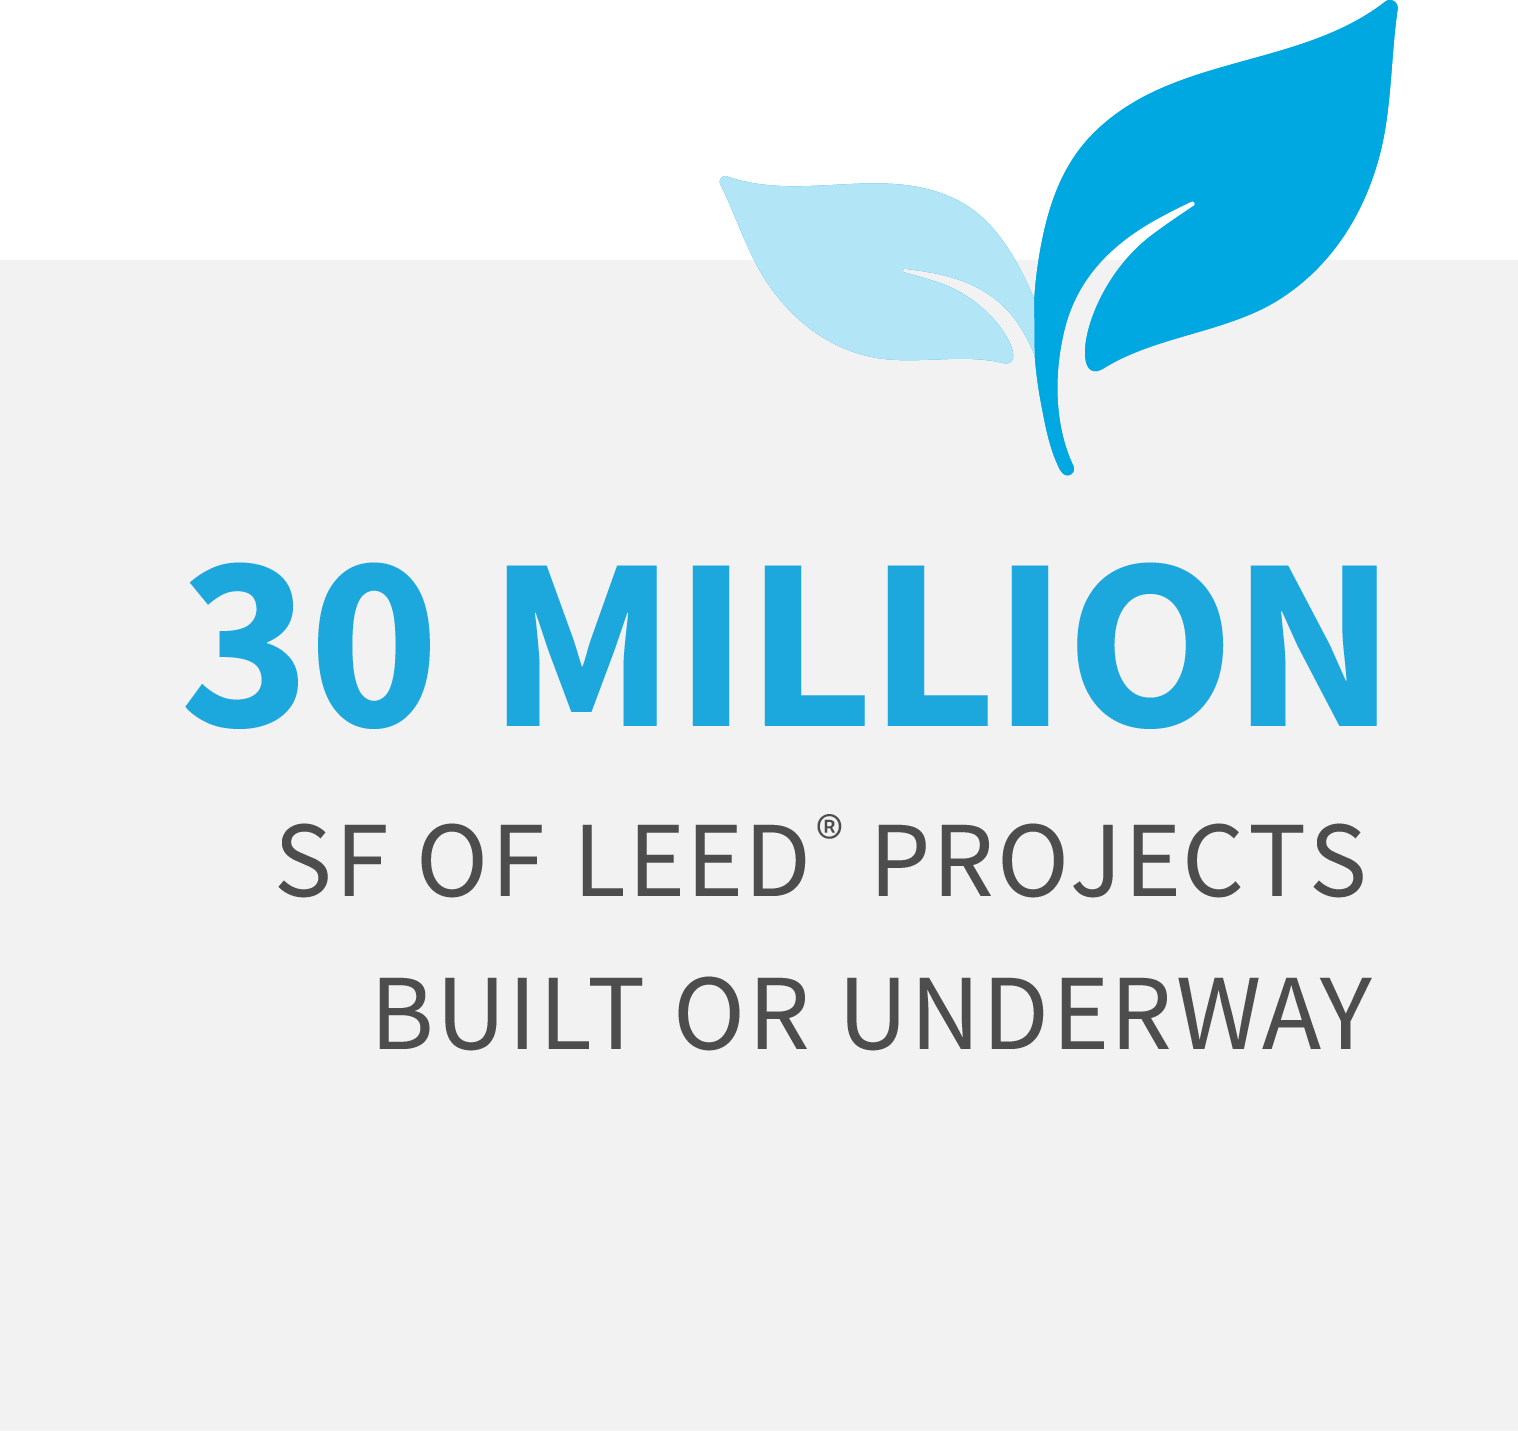 cbg has 30 million square feet of LEED projects built or underway